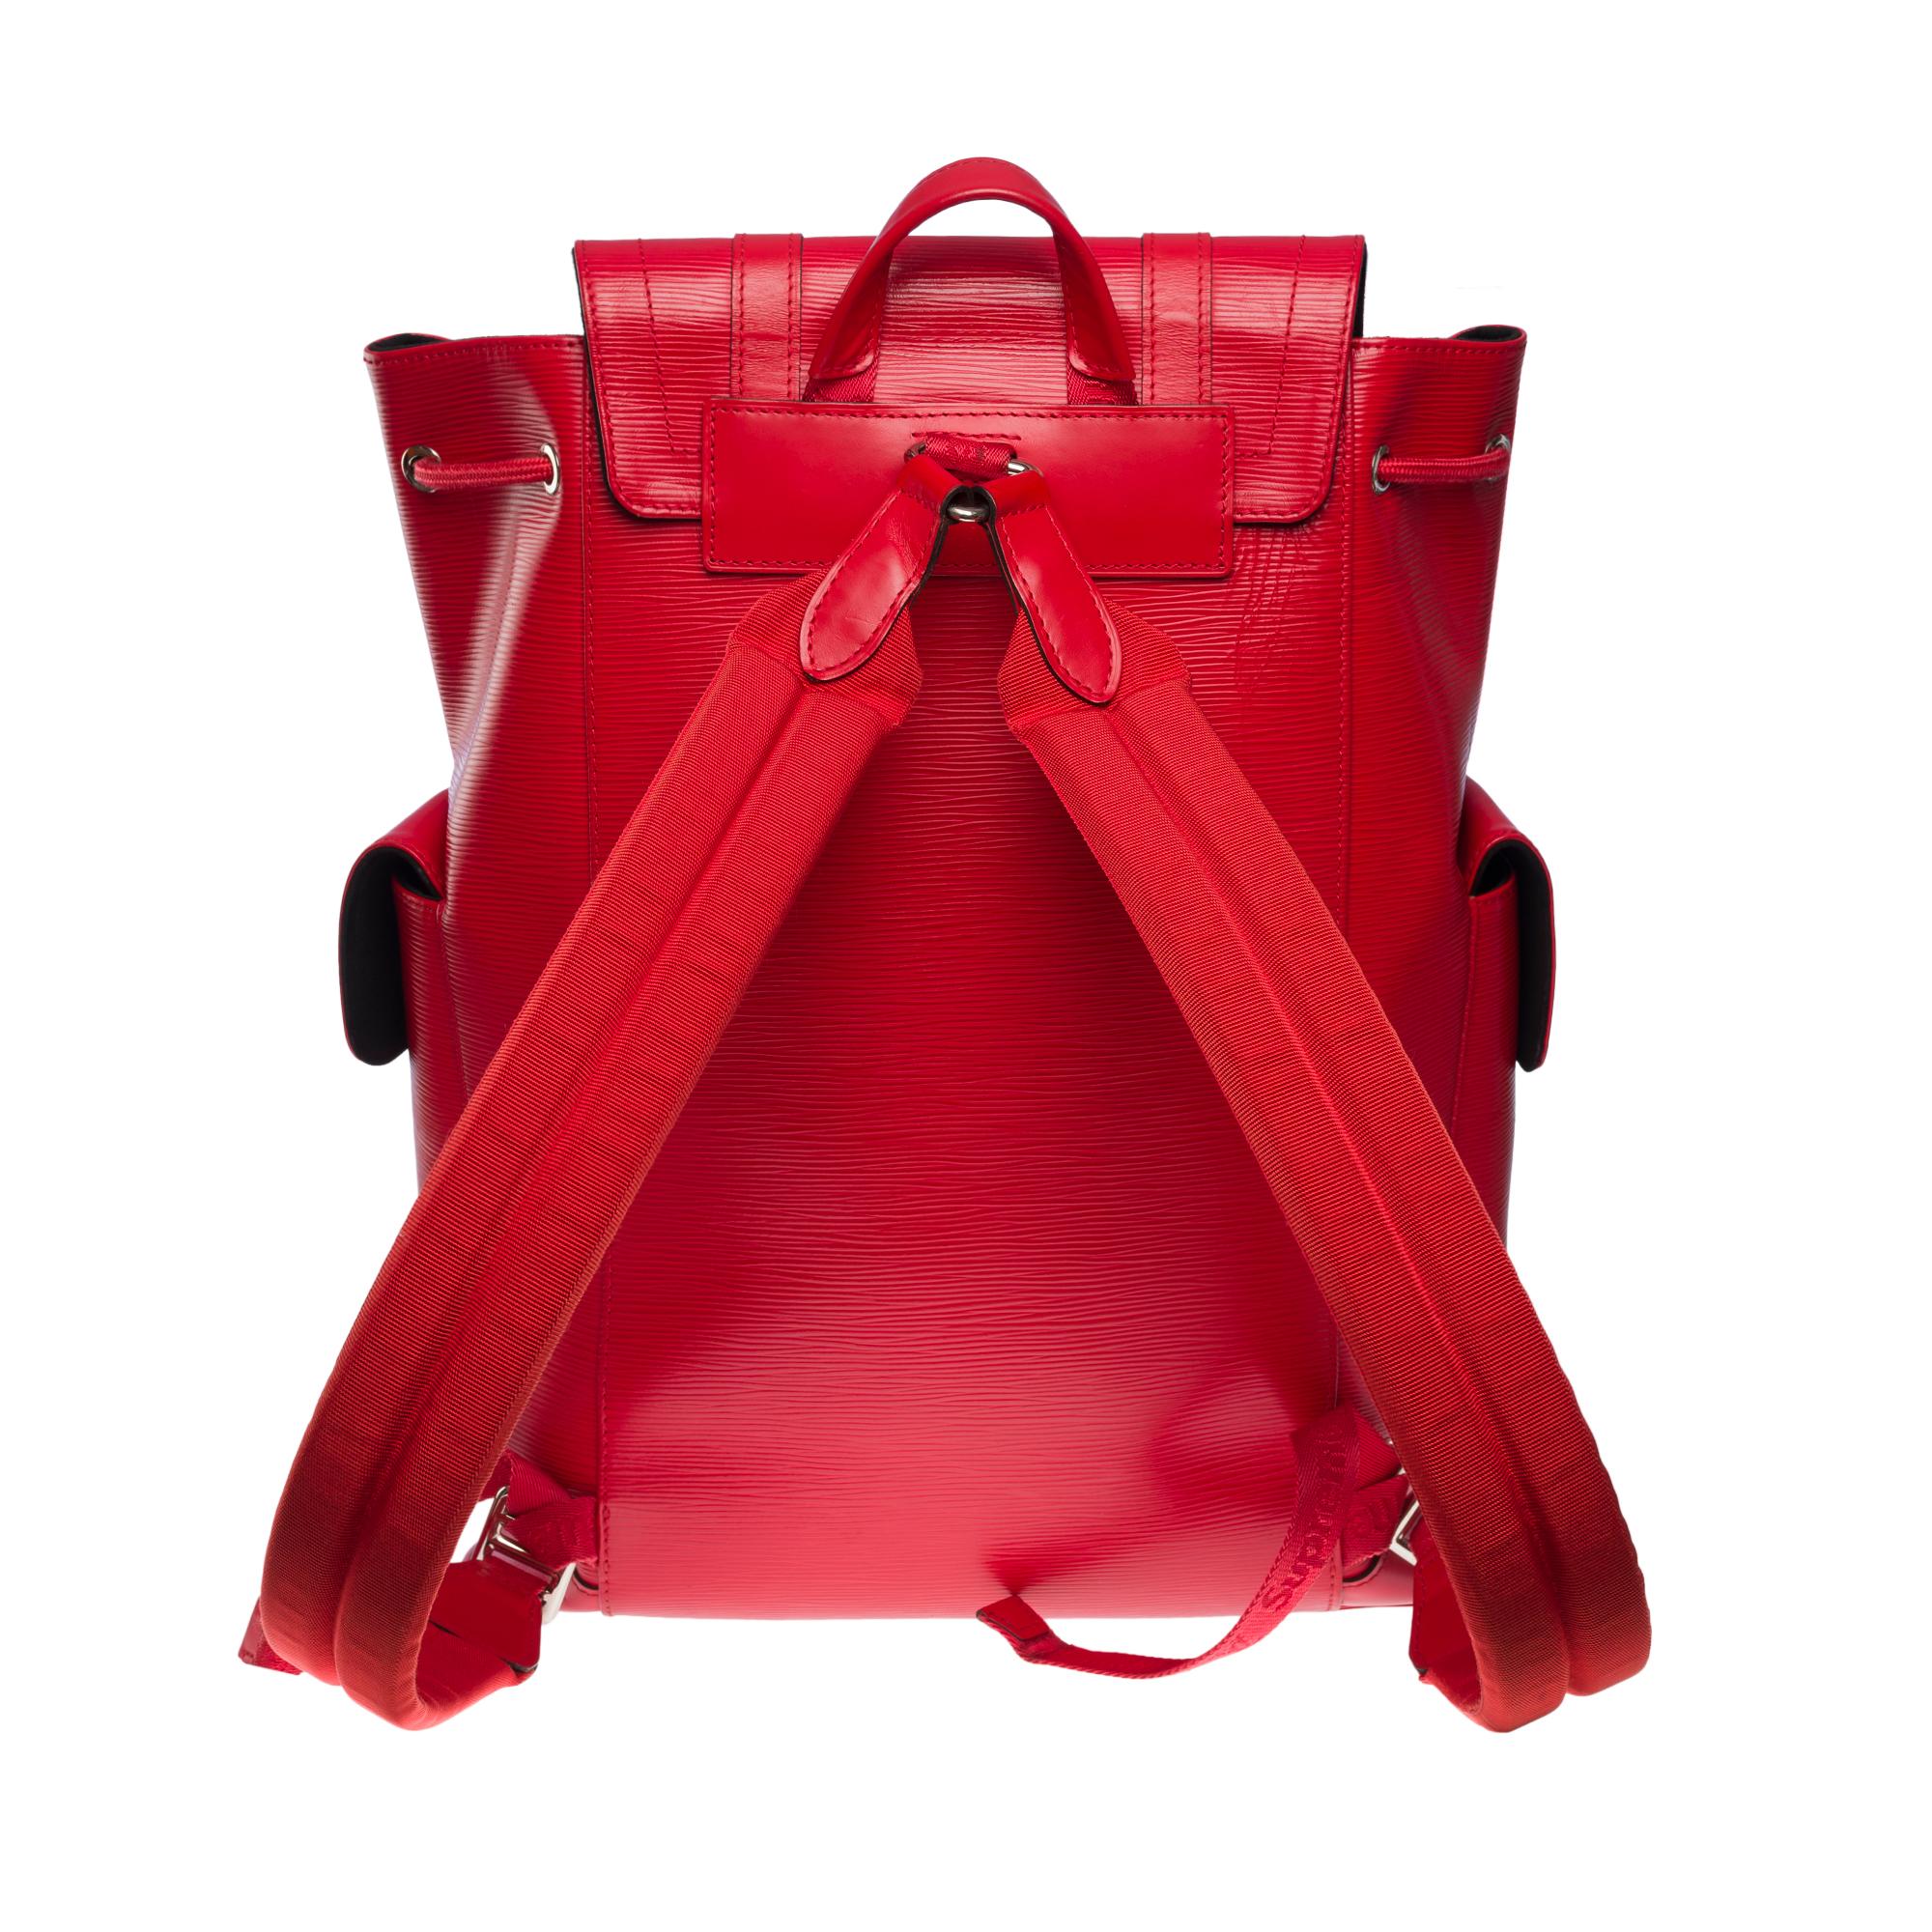 Exceptional Christopher PM Louis Vuitton X Supreme in Red Epi leather limited edition backpack

Presented in 2017 at the LV Fall Fashion Show, the Louis Vuitton x Supreme Christophe backpack is a structured bag with a remarkable style. Crafted from